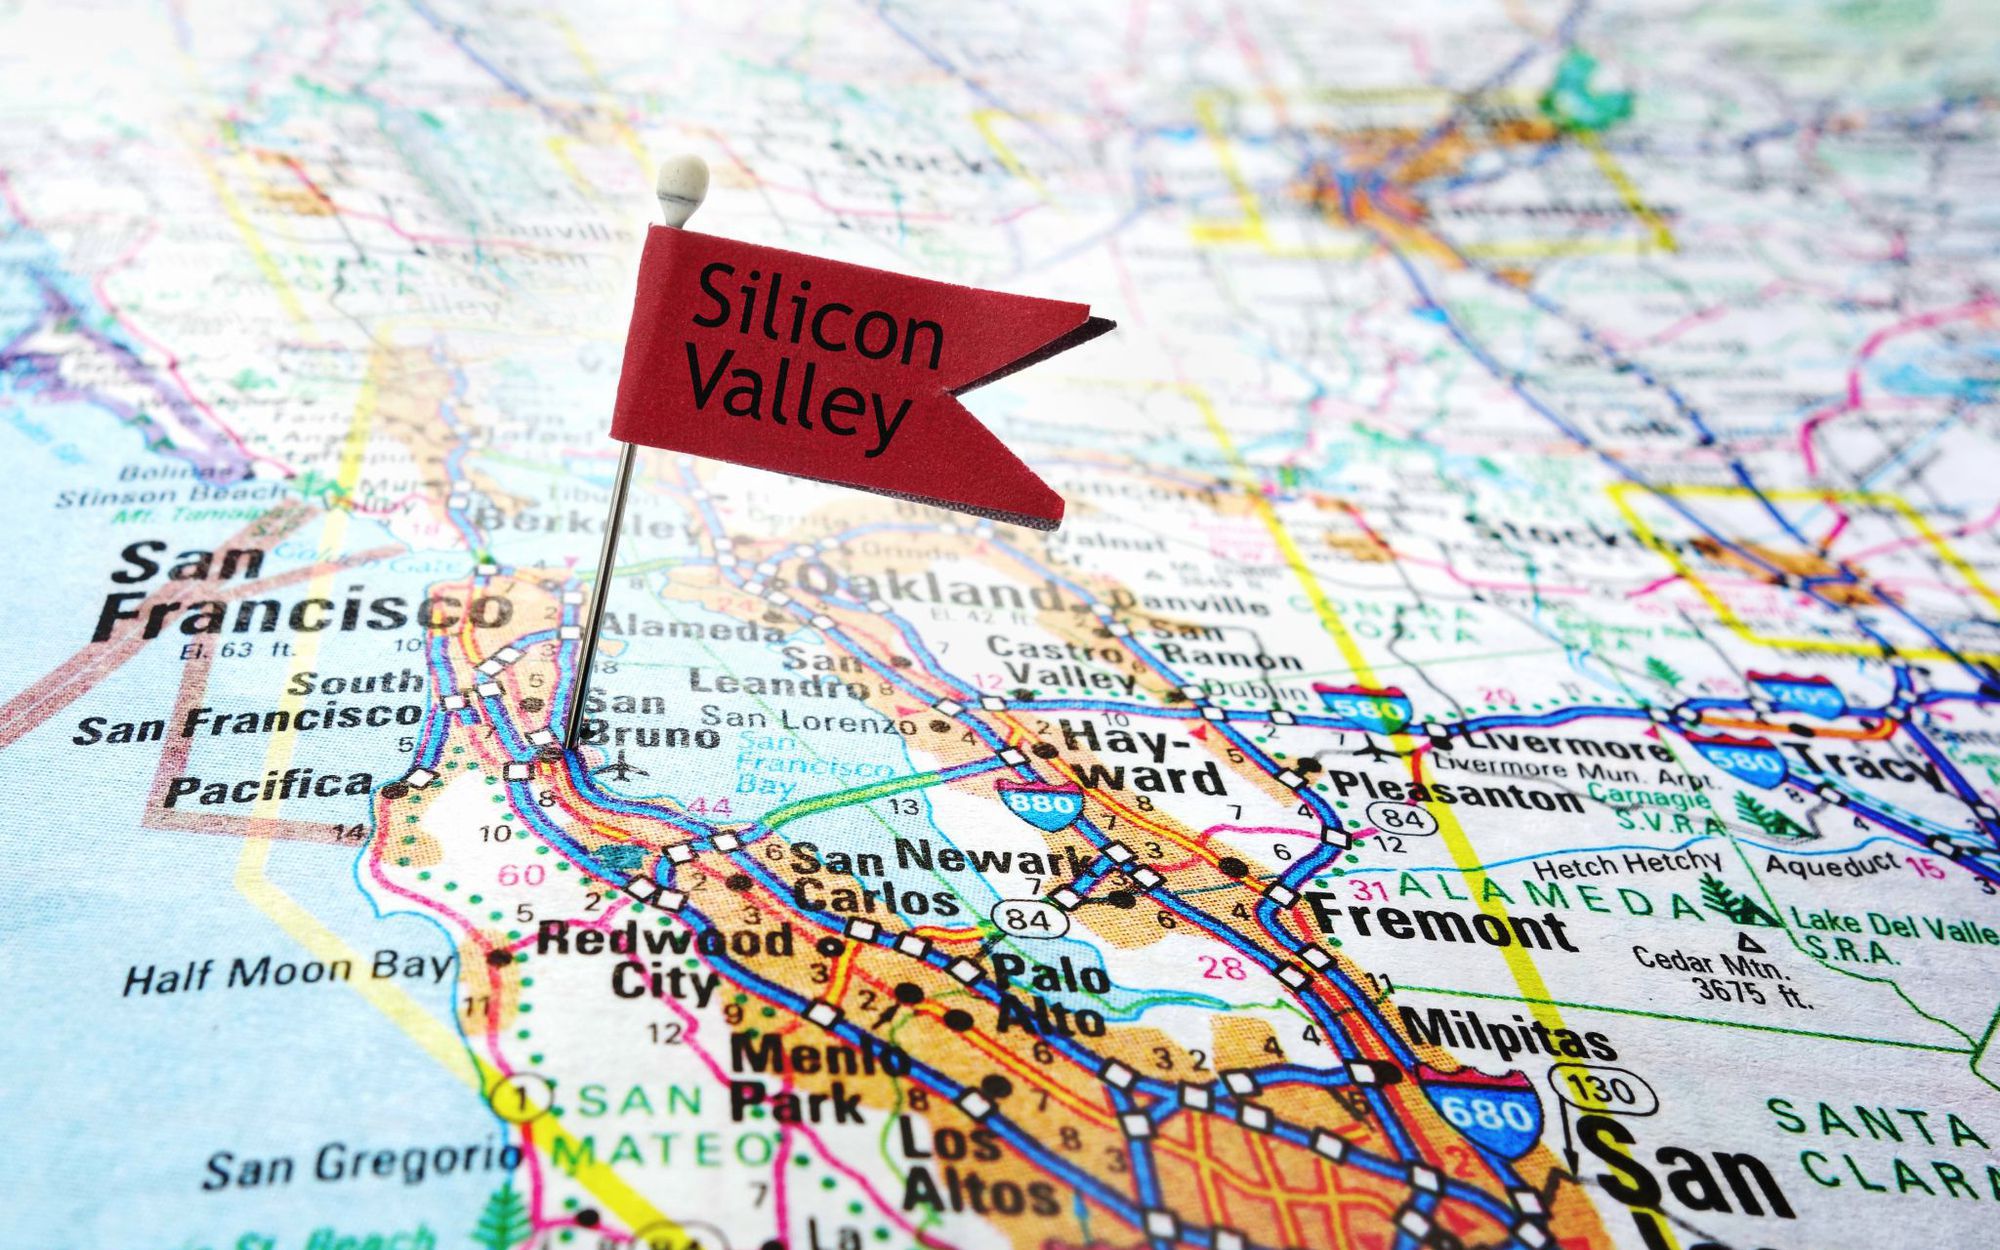 In the midst of global chaos, Silicon Valley’s tech industry has a rare collapse